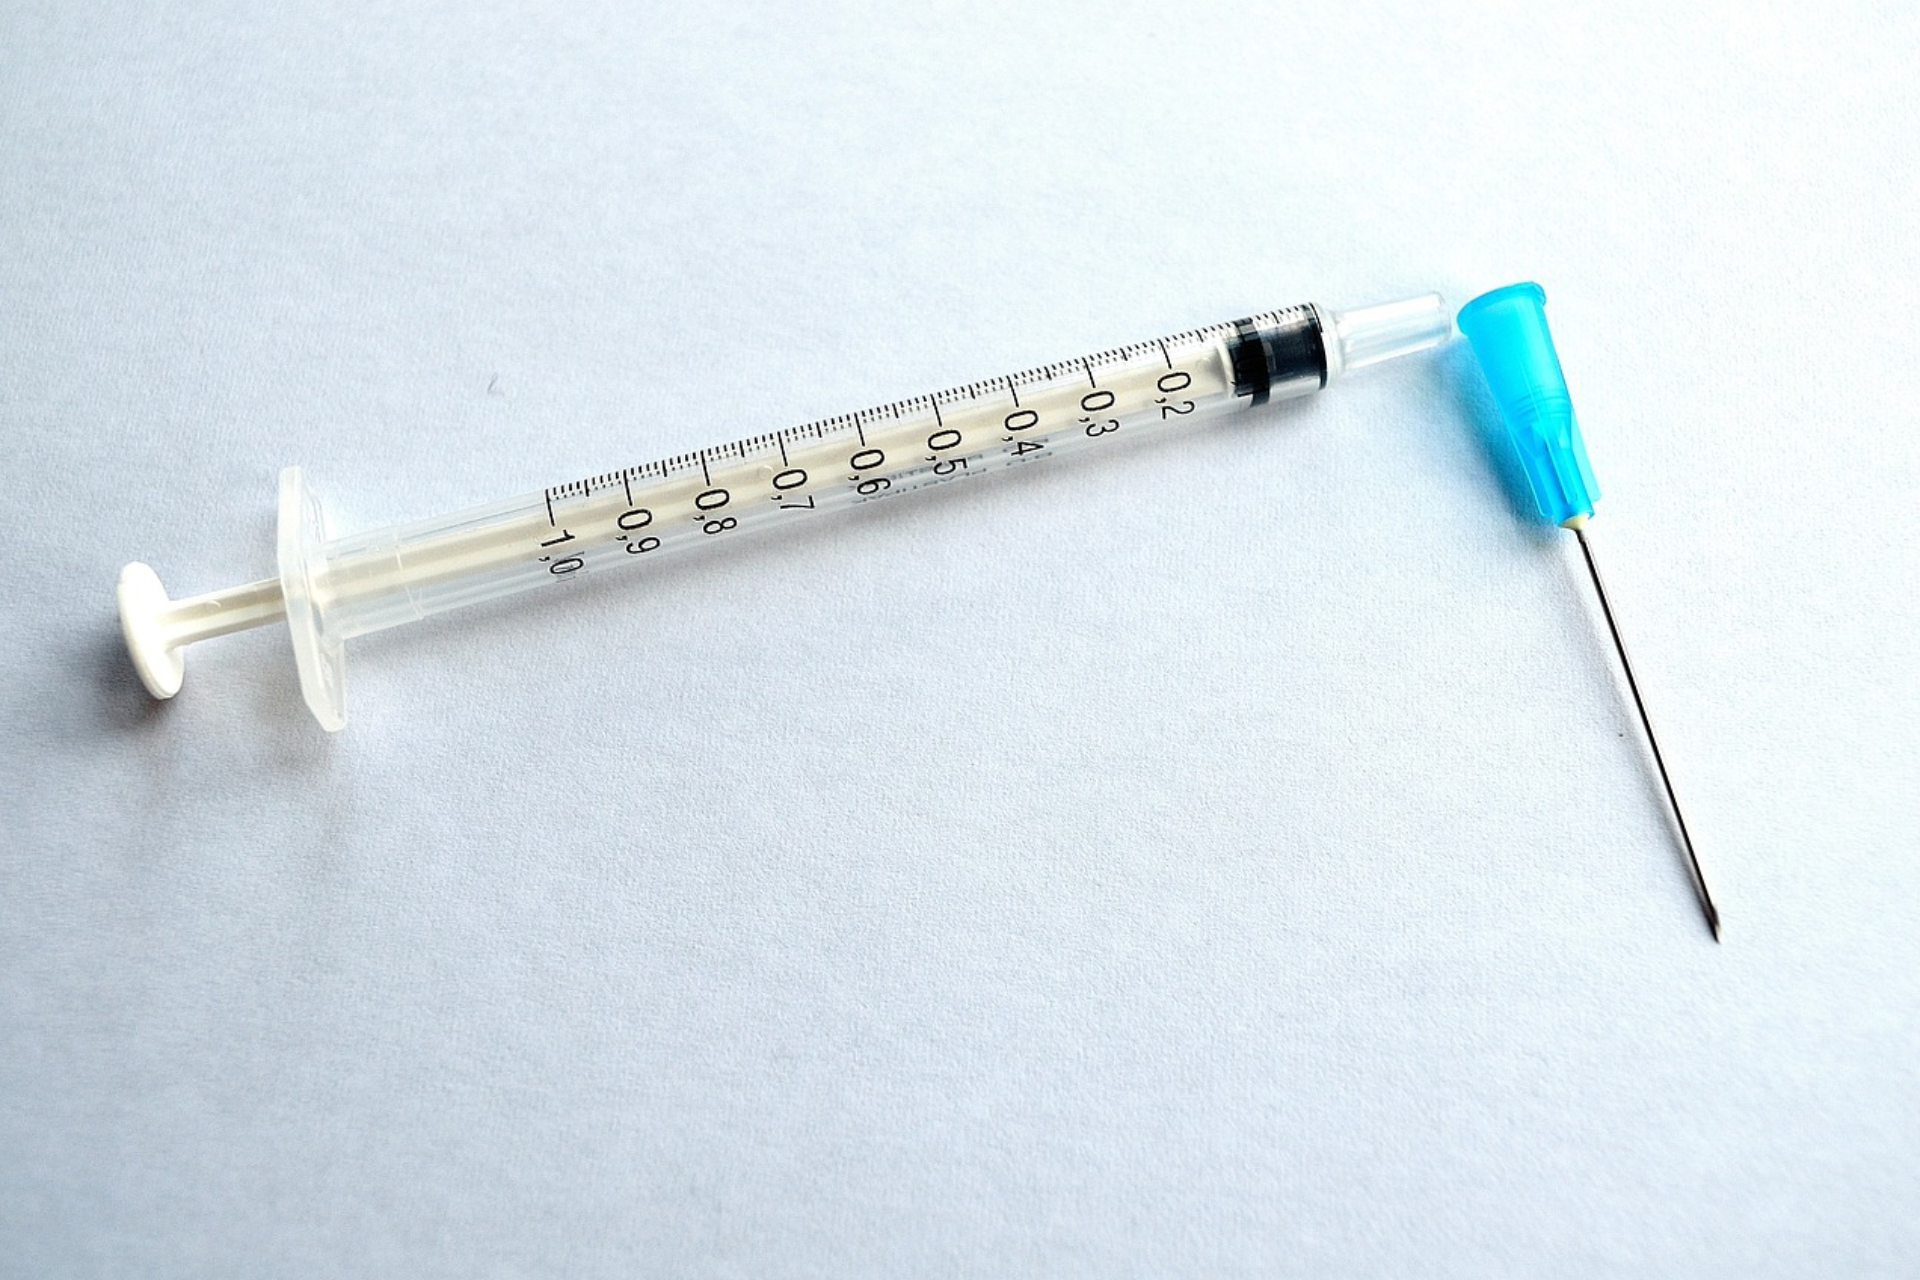 Anti-HIV injections